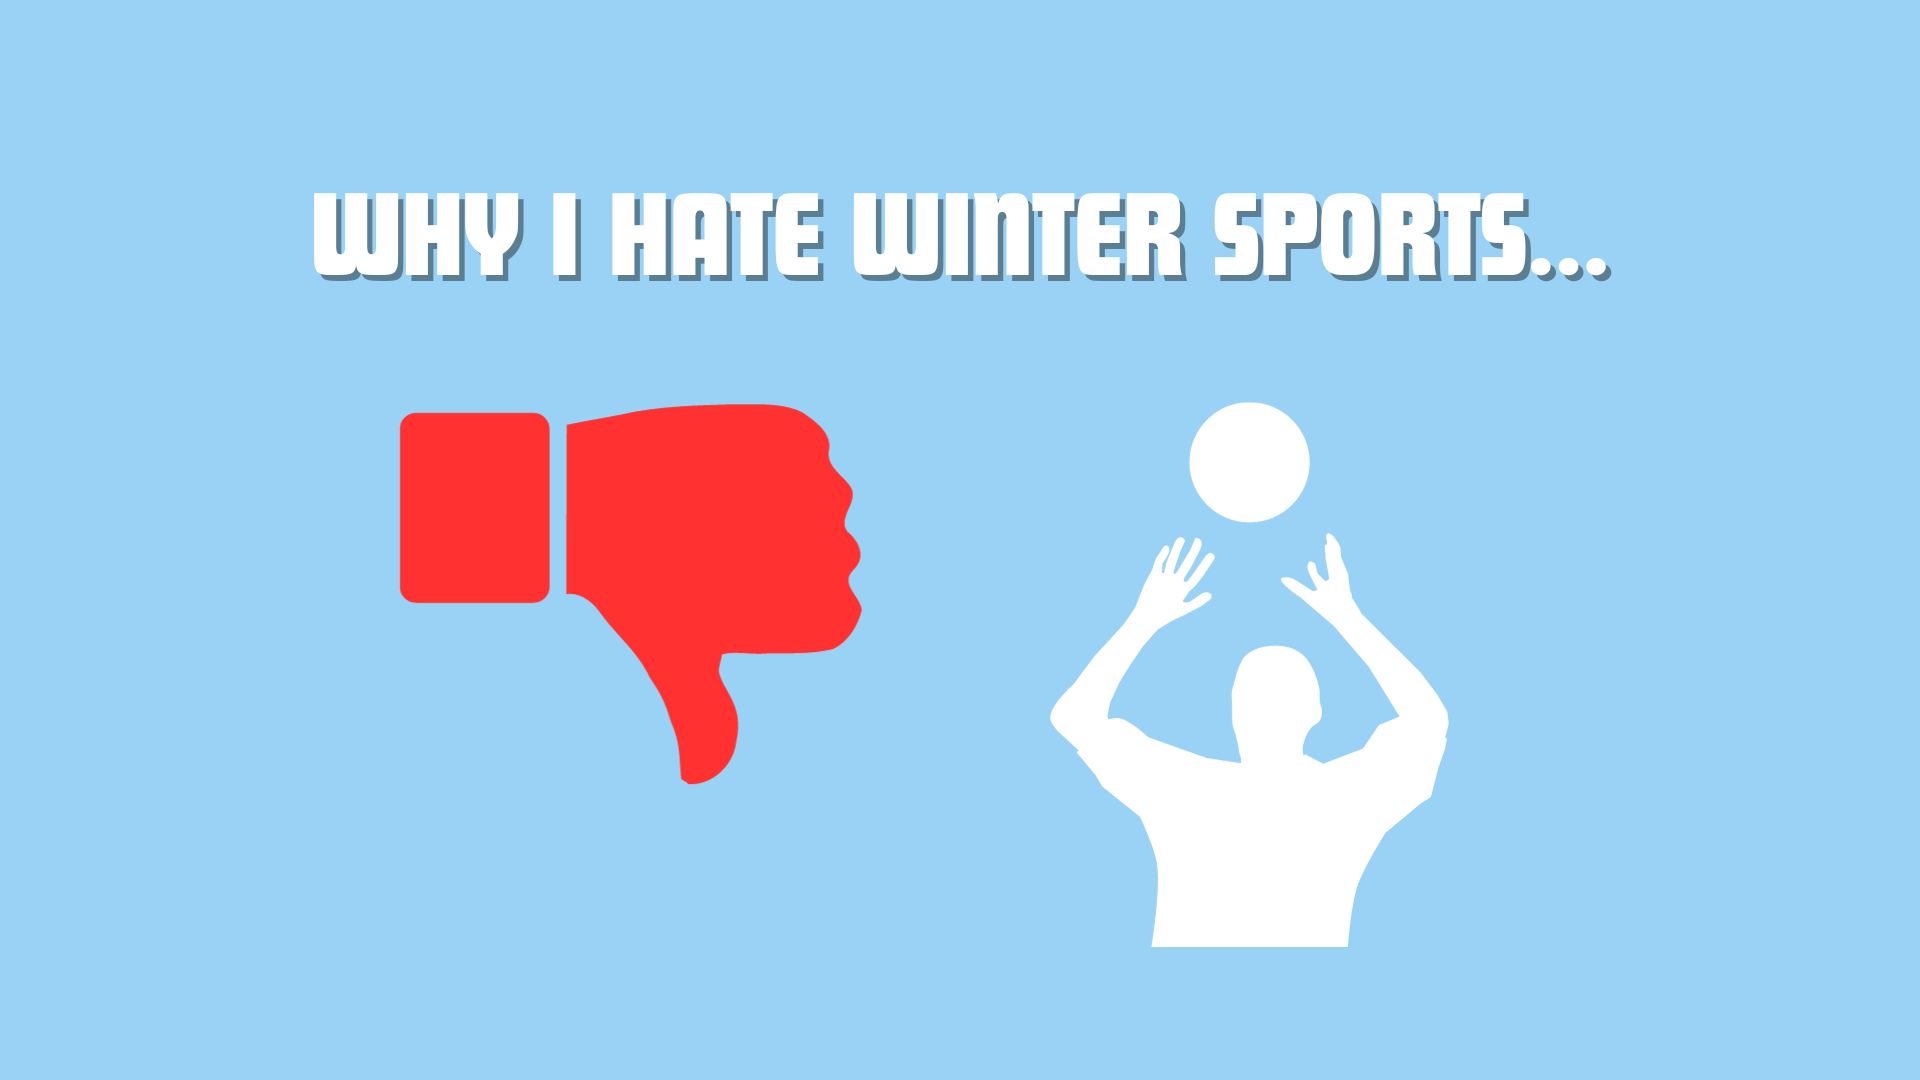 Abijah shares his opinions on why he would never play a winter sport.